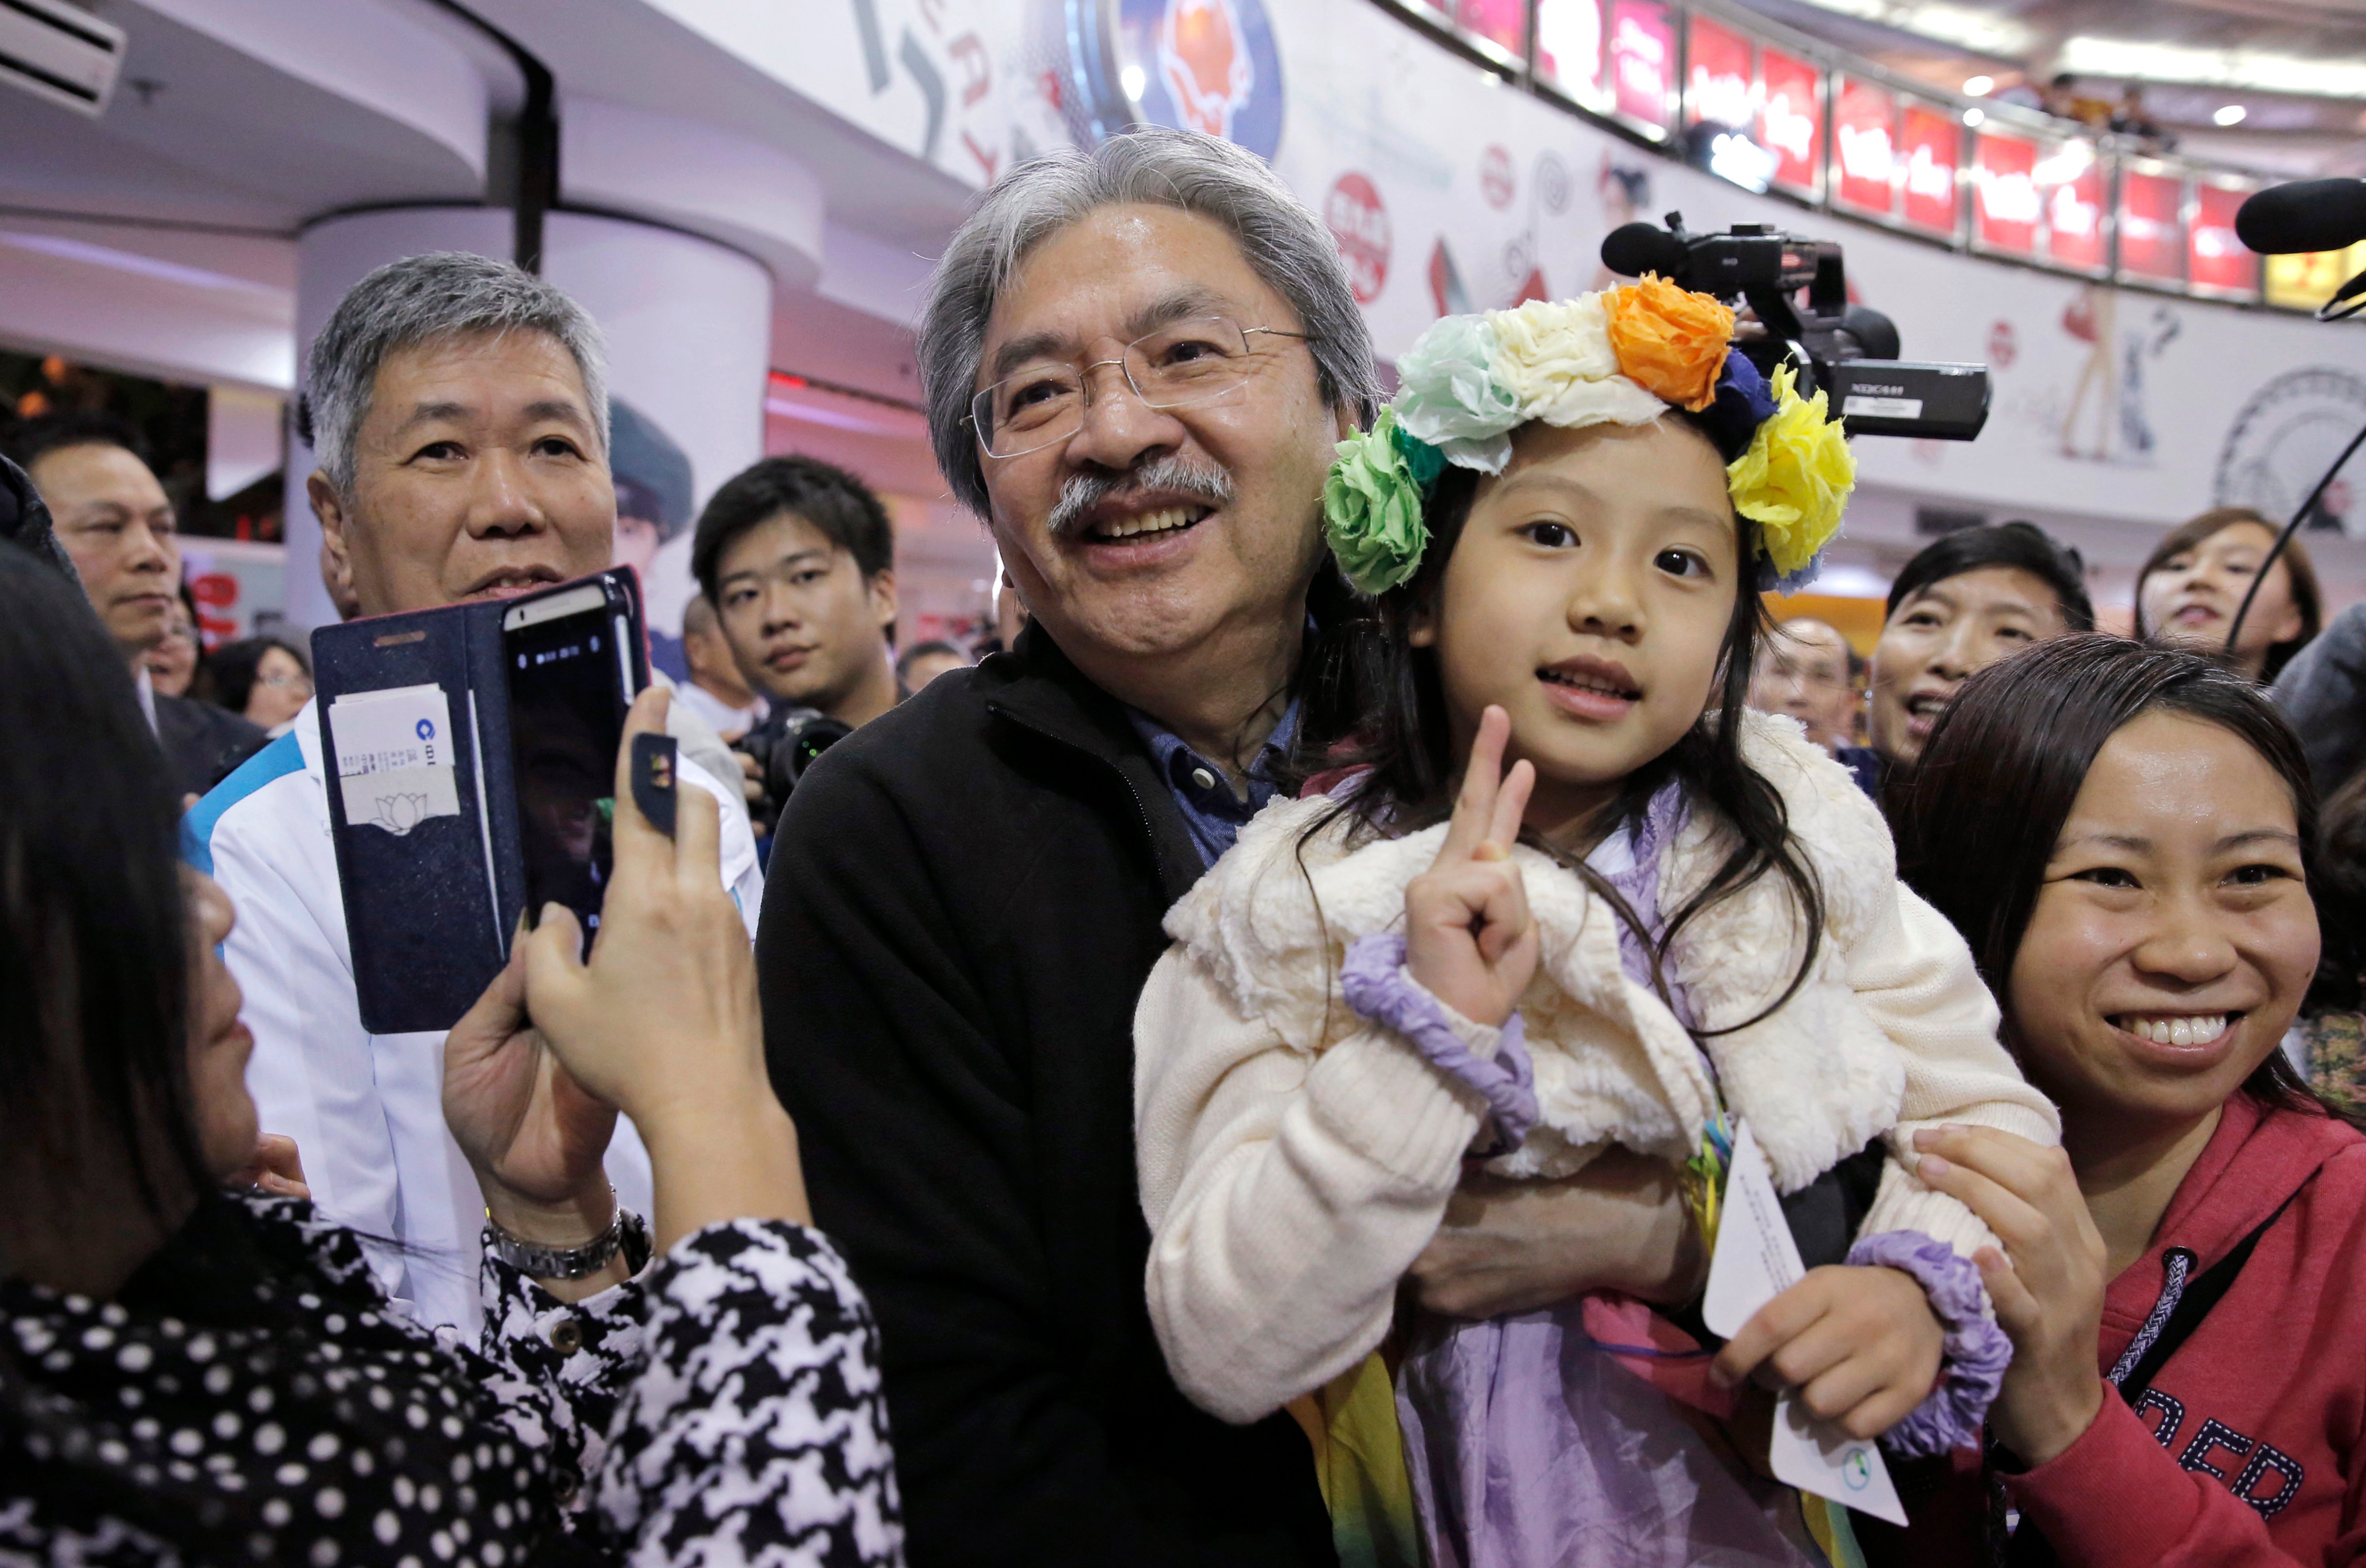 Chief Executive candidate, Hong Kong's former Financial Secretary John Tsang, center, holds a child as he poses for a photograph with his supporters at an election campaign in Hong Kong on March 16, 2017 (Kin Cheung—AP)